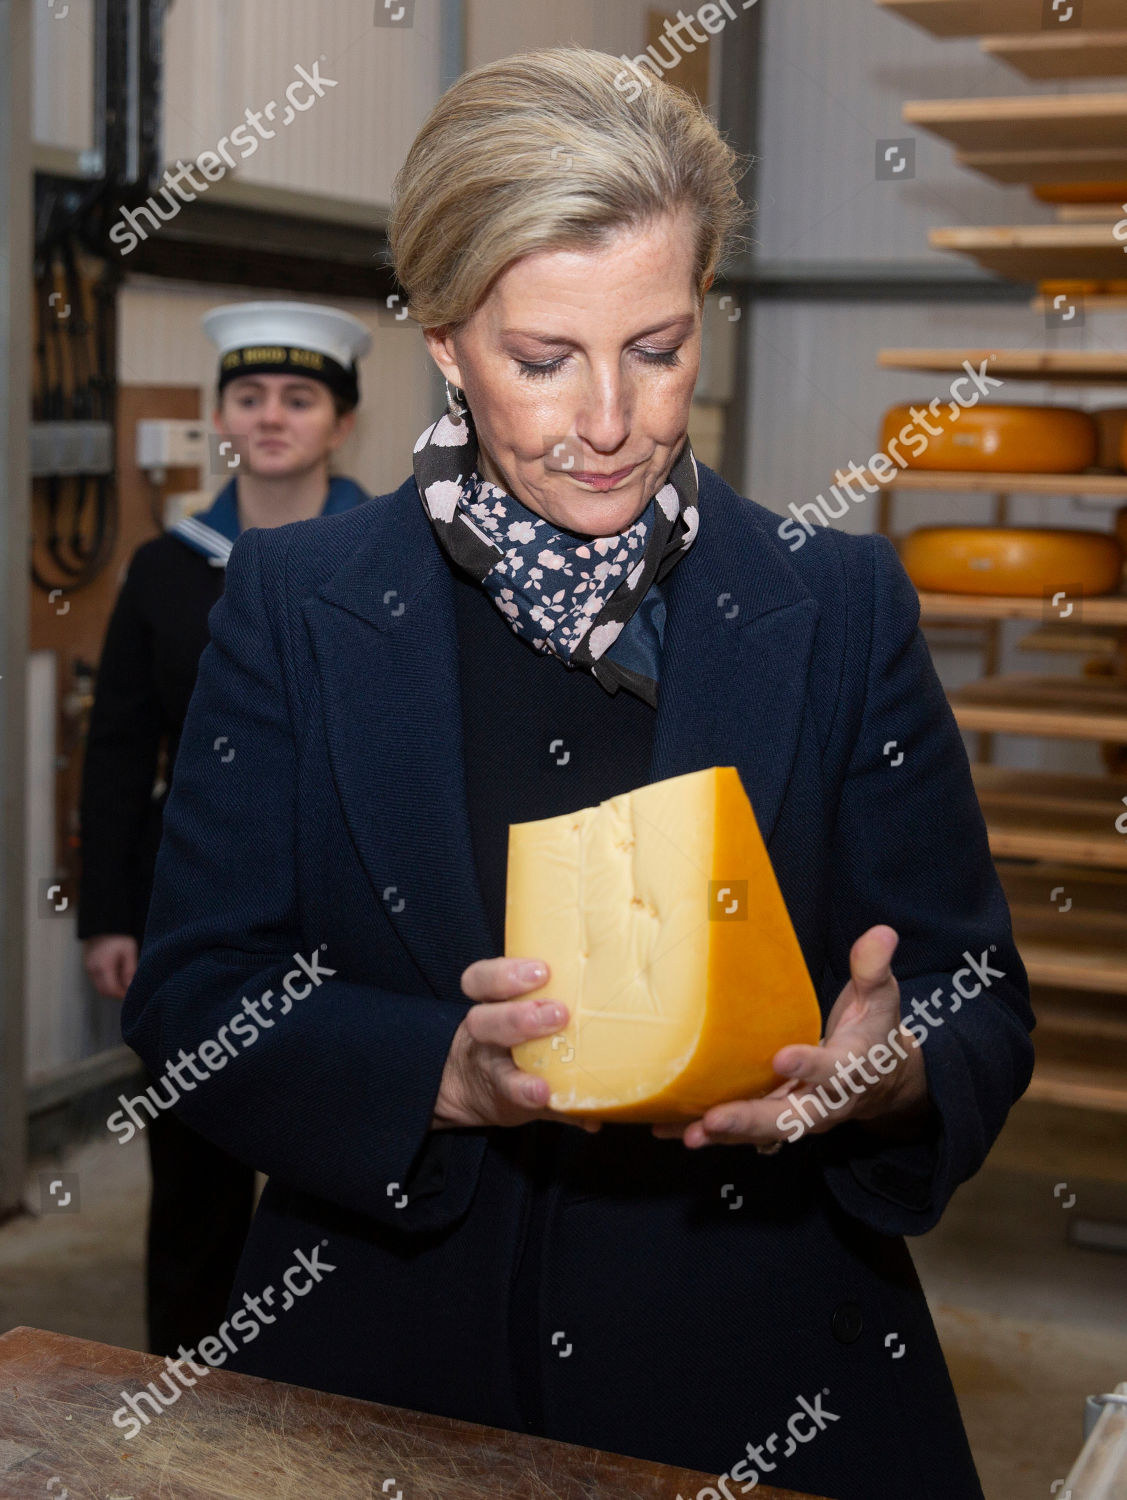 sophie-countess-of-wessex-visit-to-cornwall-uk-shutterstock-editorial-10013548f.jpg